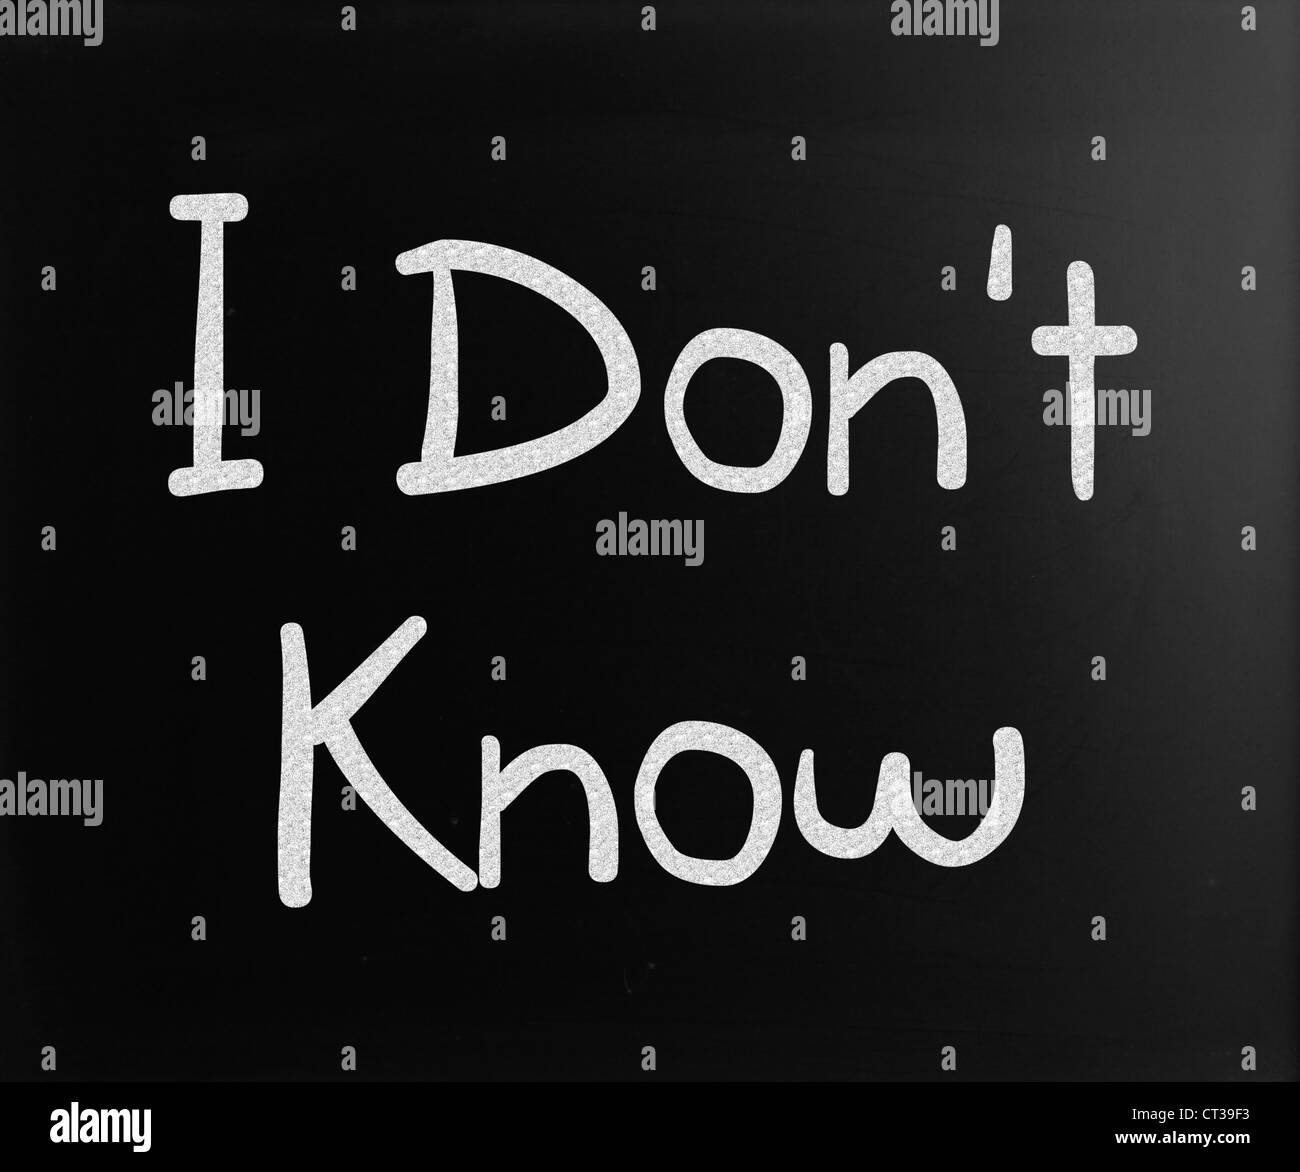 I don t know idea. I don't know надпись. Картинка i don't know. Обои с надписью i don't. I dont know i don't know i don't know.